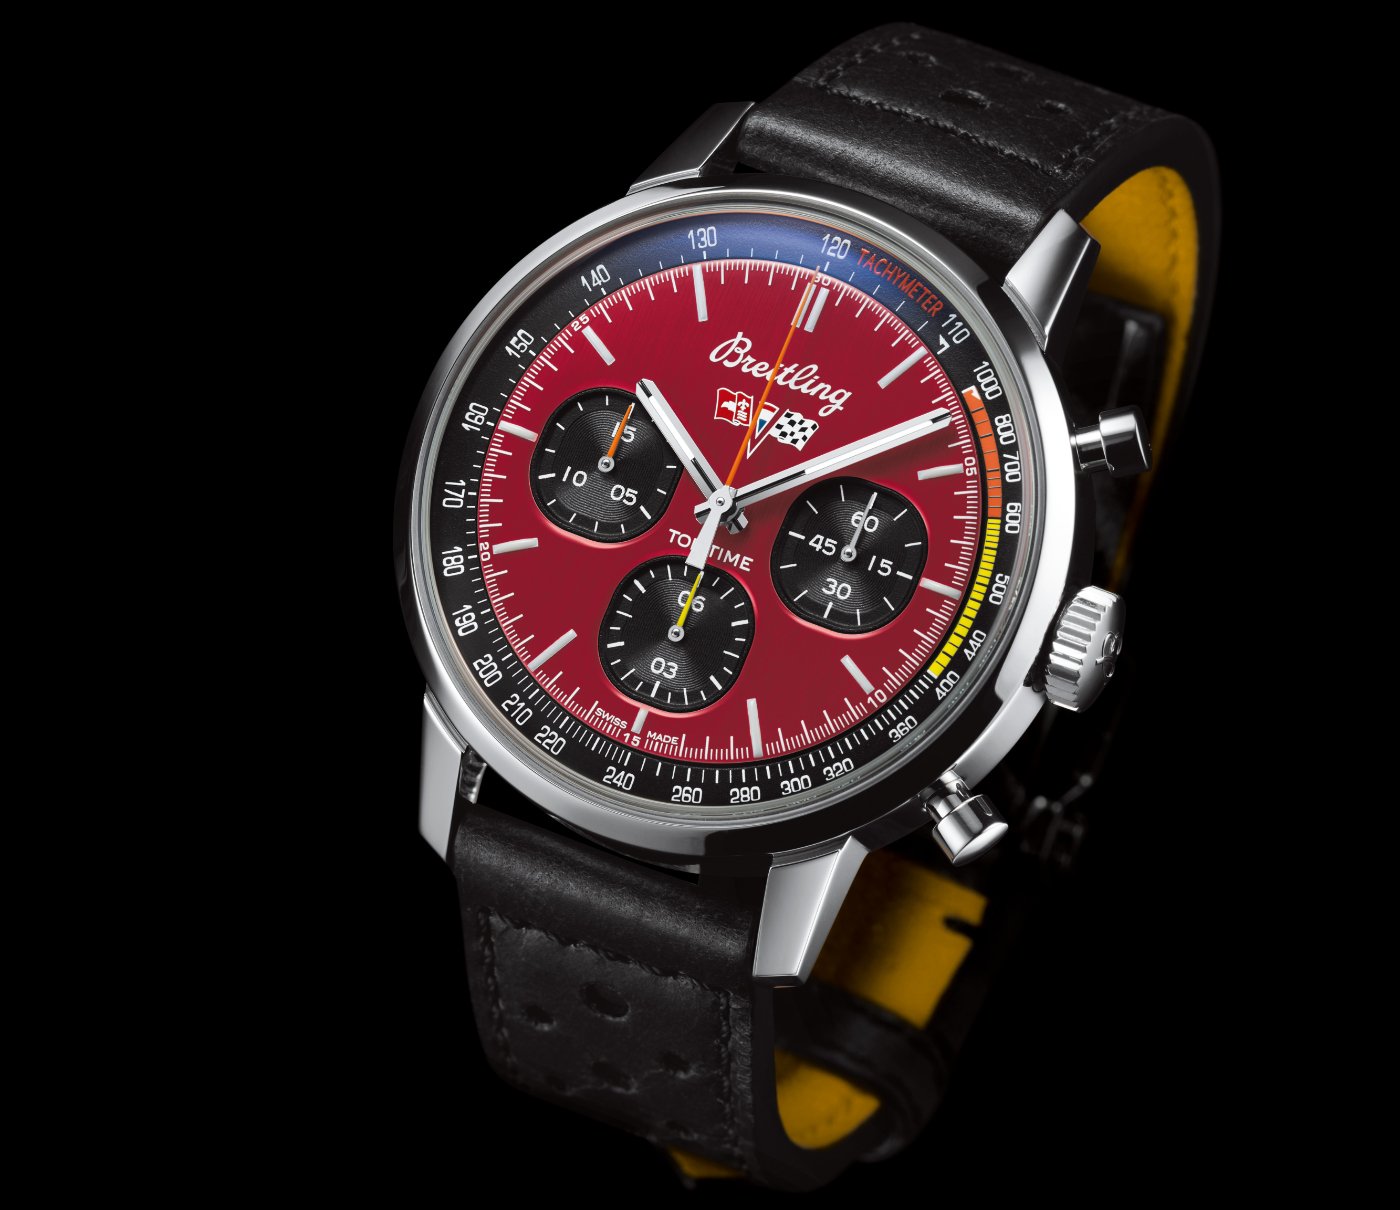 An introduction to Breitling's Top Time Classic Cars